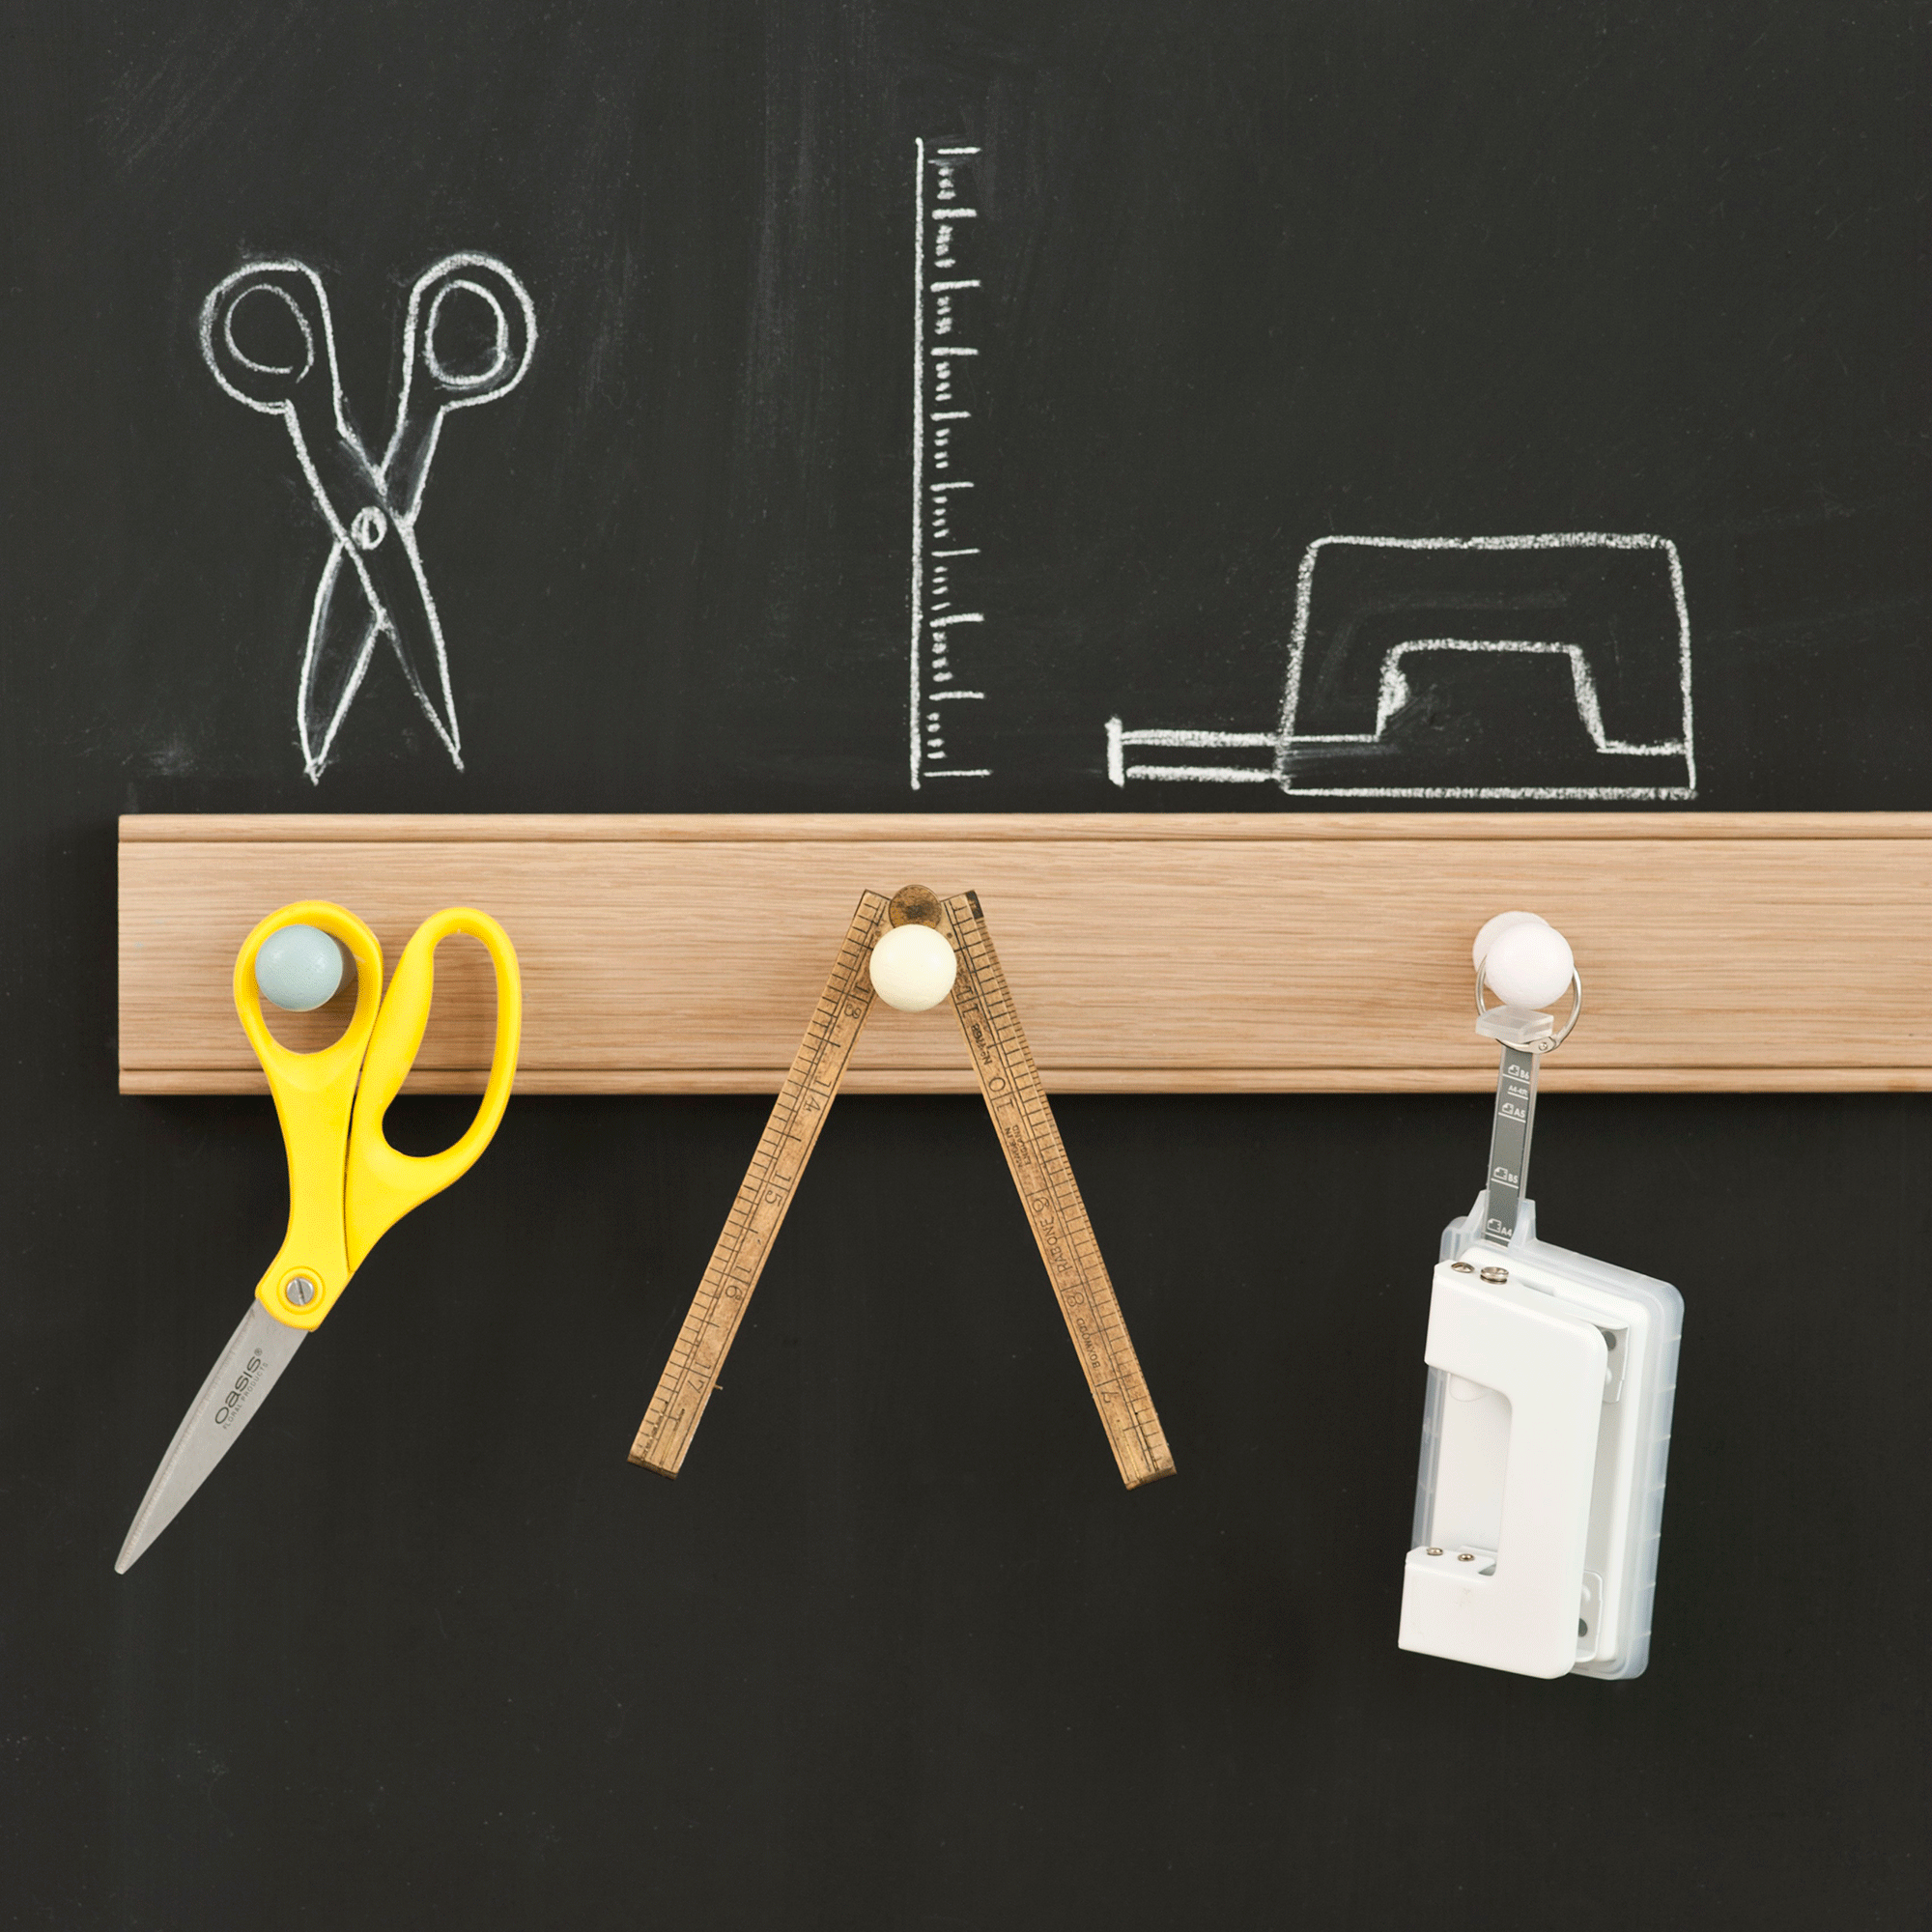 Blackboard with wooden railing and tools